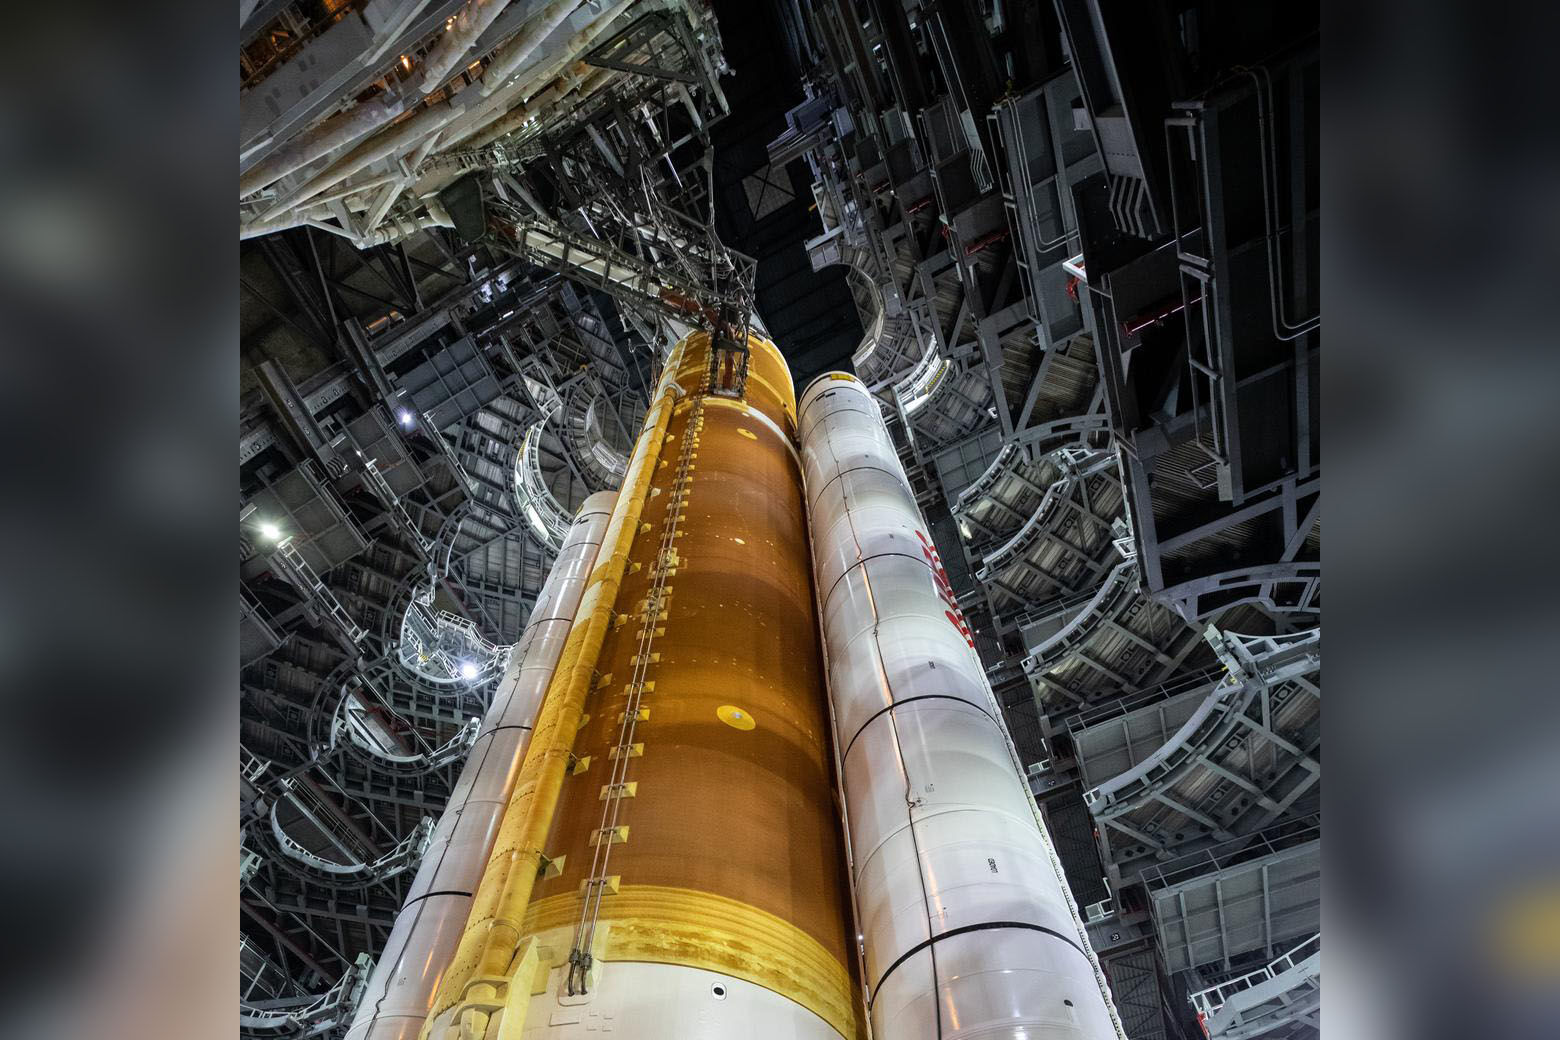 The Artemis 1 stack seen inside the Vehicle Assembly Building. (Courtesy NASA)